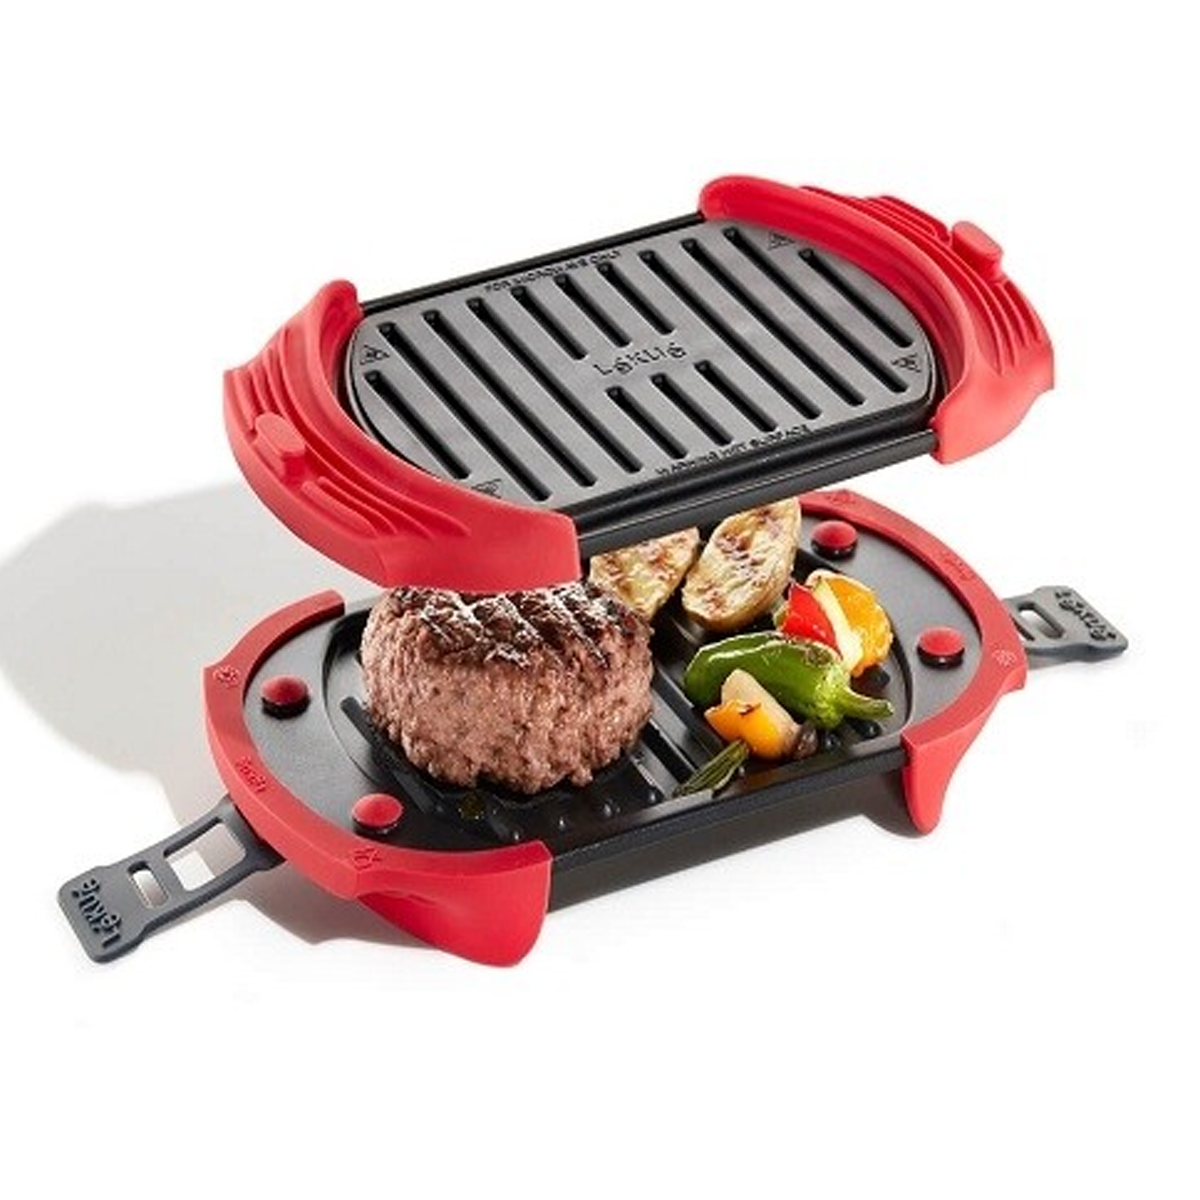 Microwave Grill Red and Black - Lekue